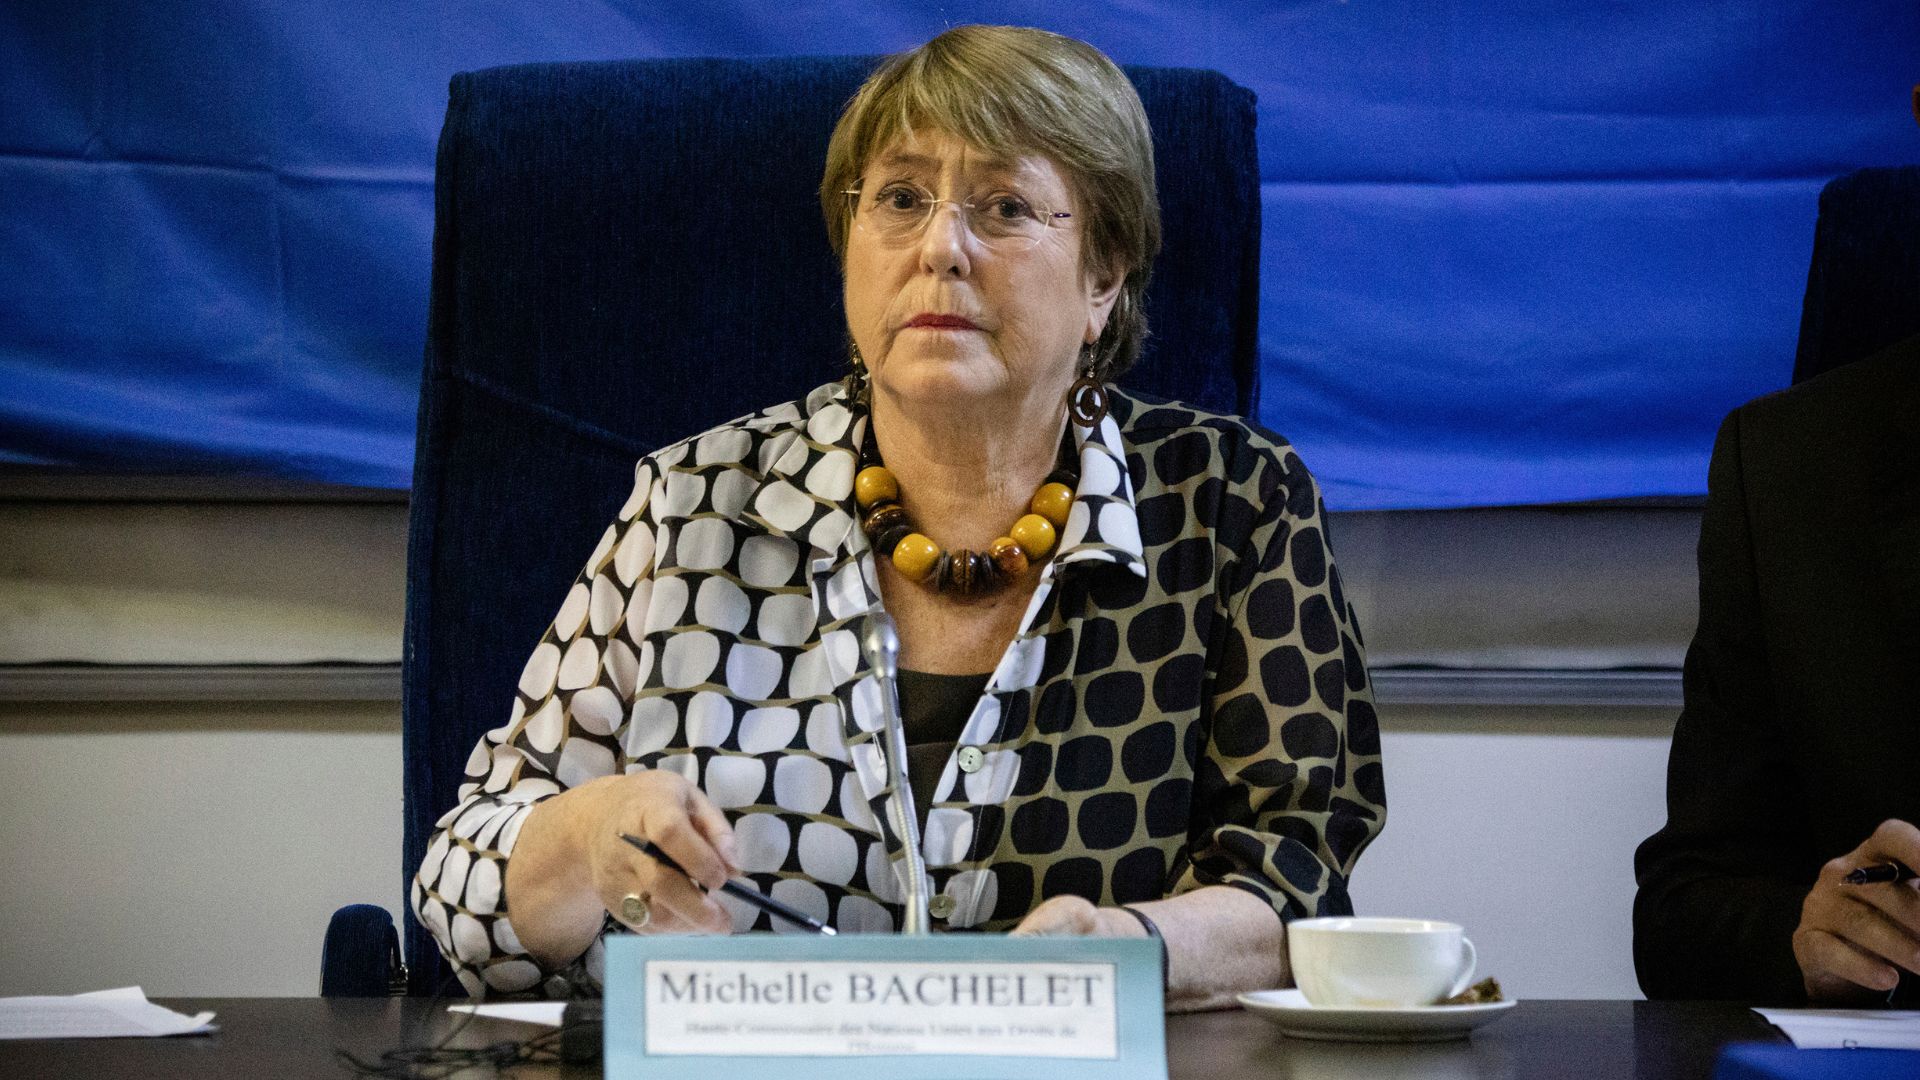 Bachelet: Pressure ‘will not affect’ report on China’s Uighurs